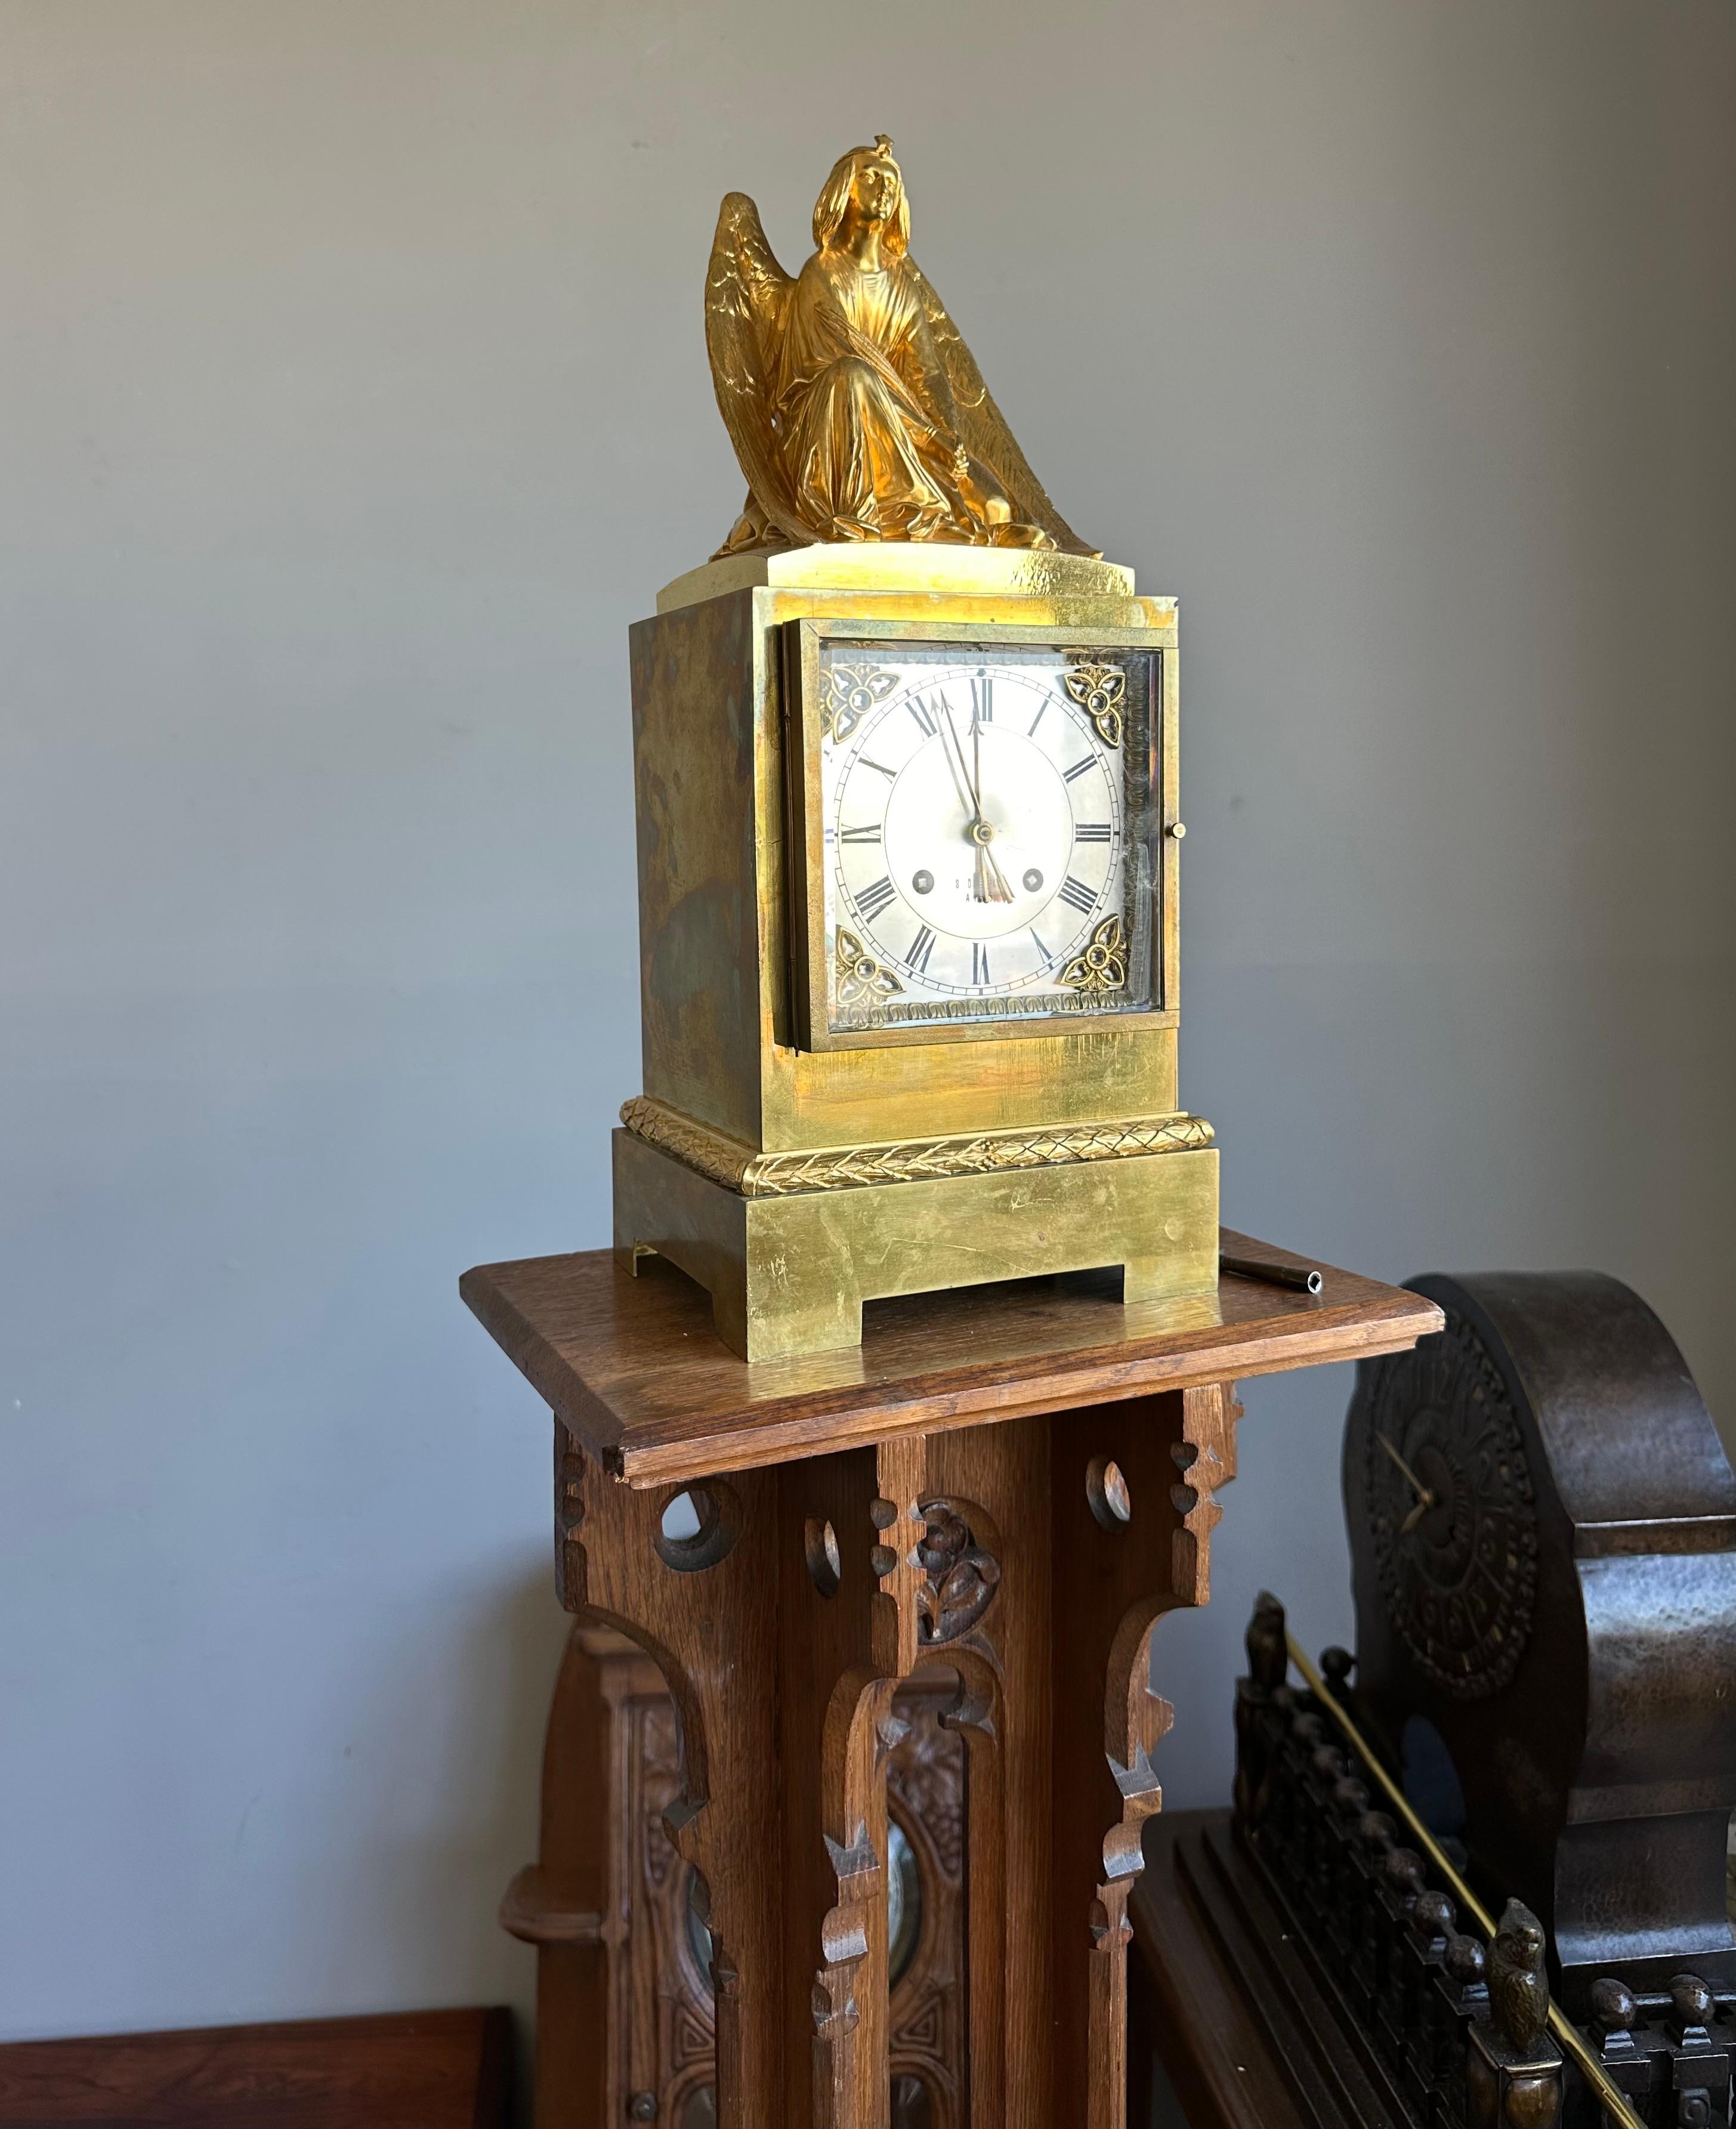 Rare and wonderful antique clock from the early 1800s.  Marked: S. Devaulx, Paris.

Having an impressive, stylish and sizable antique clock like this gracing your mantel piece or side table will instantly change the look and feel of the room she is